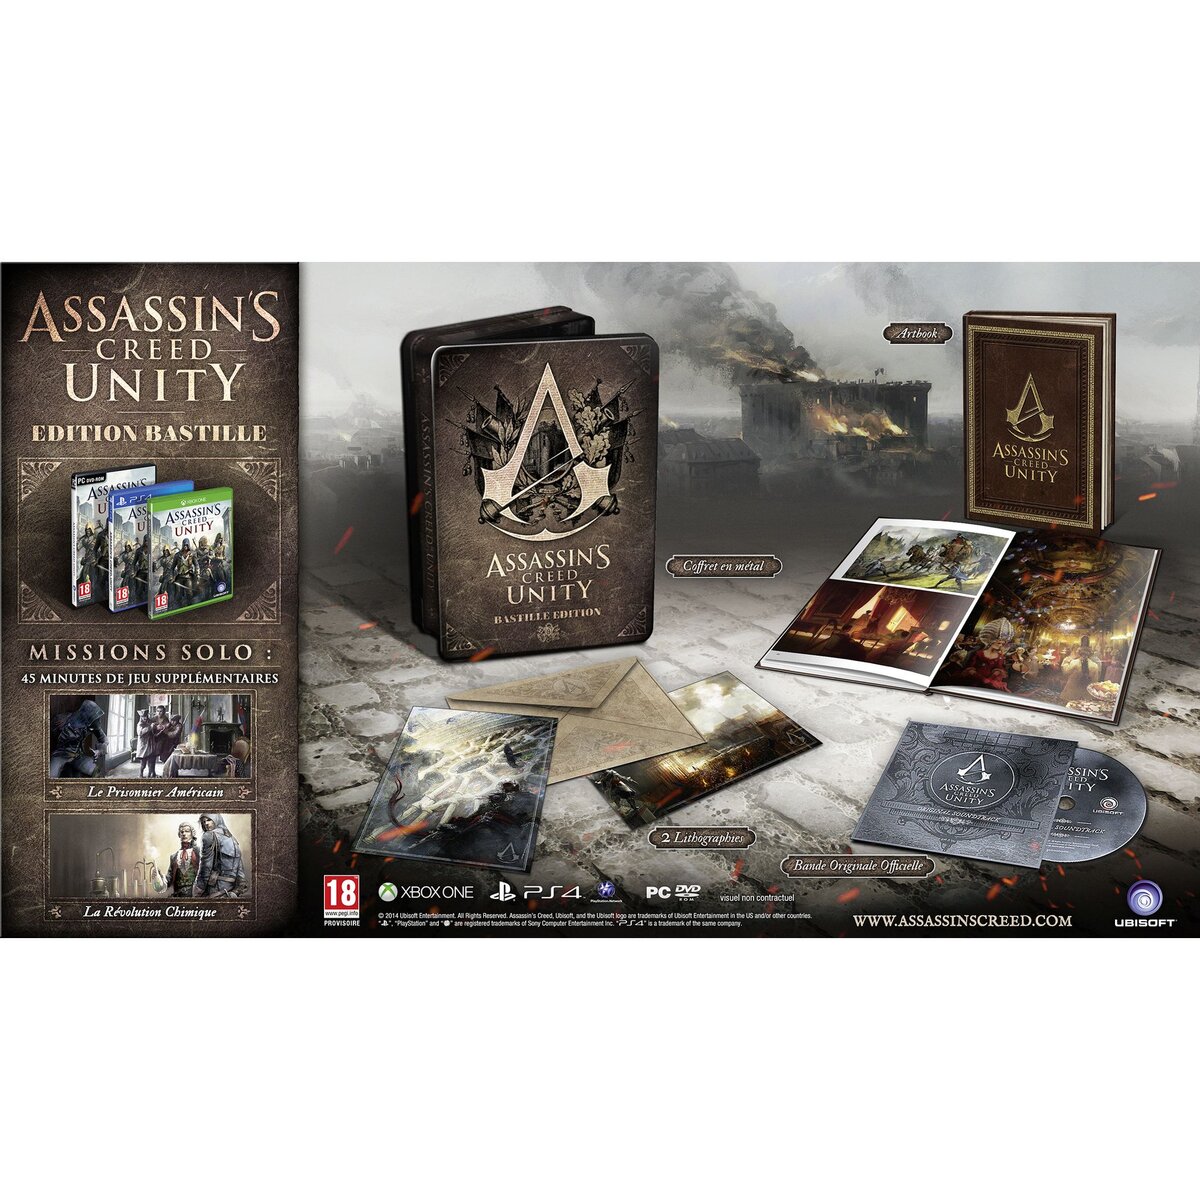 Assassin's Creed Unity PS4 - Edition Bastille